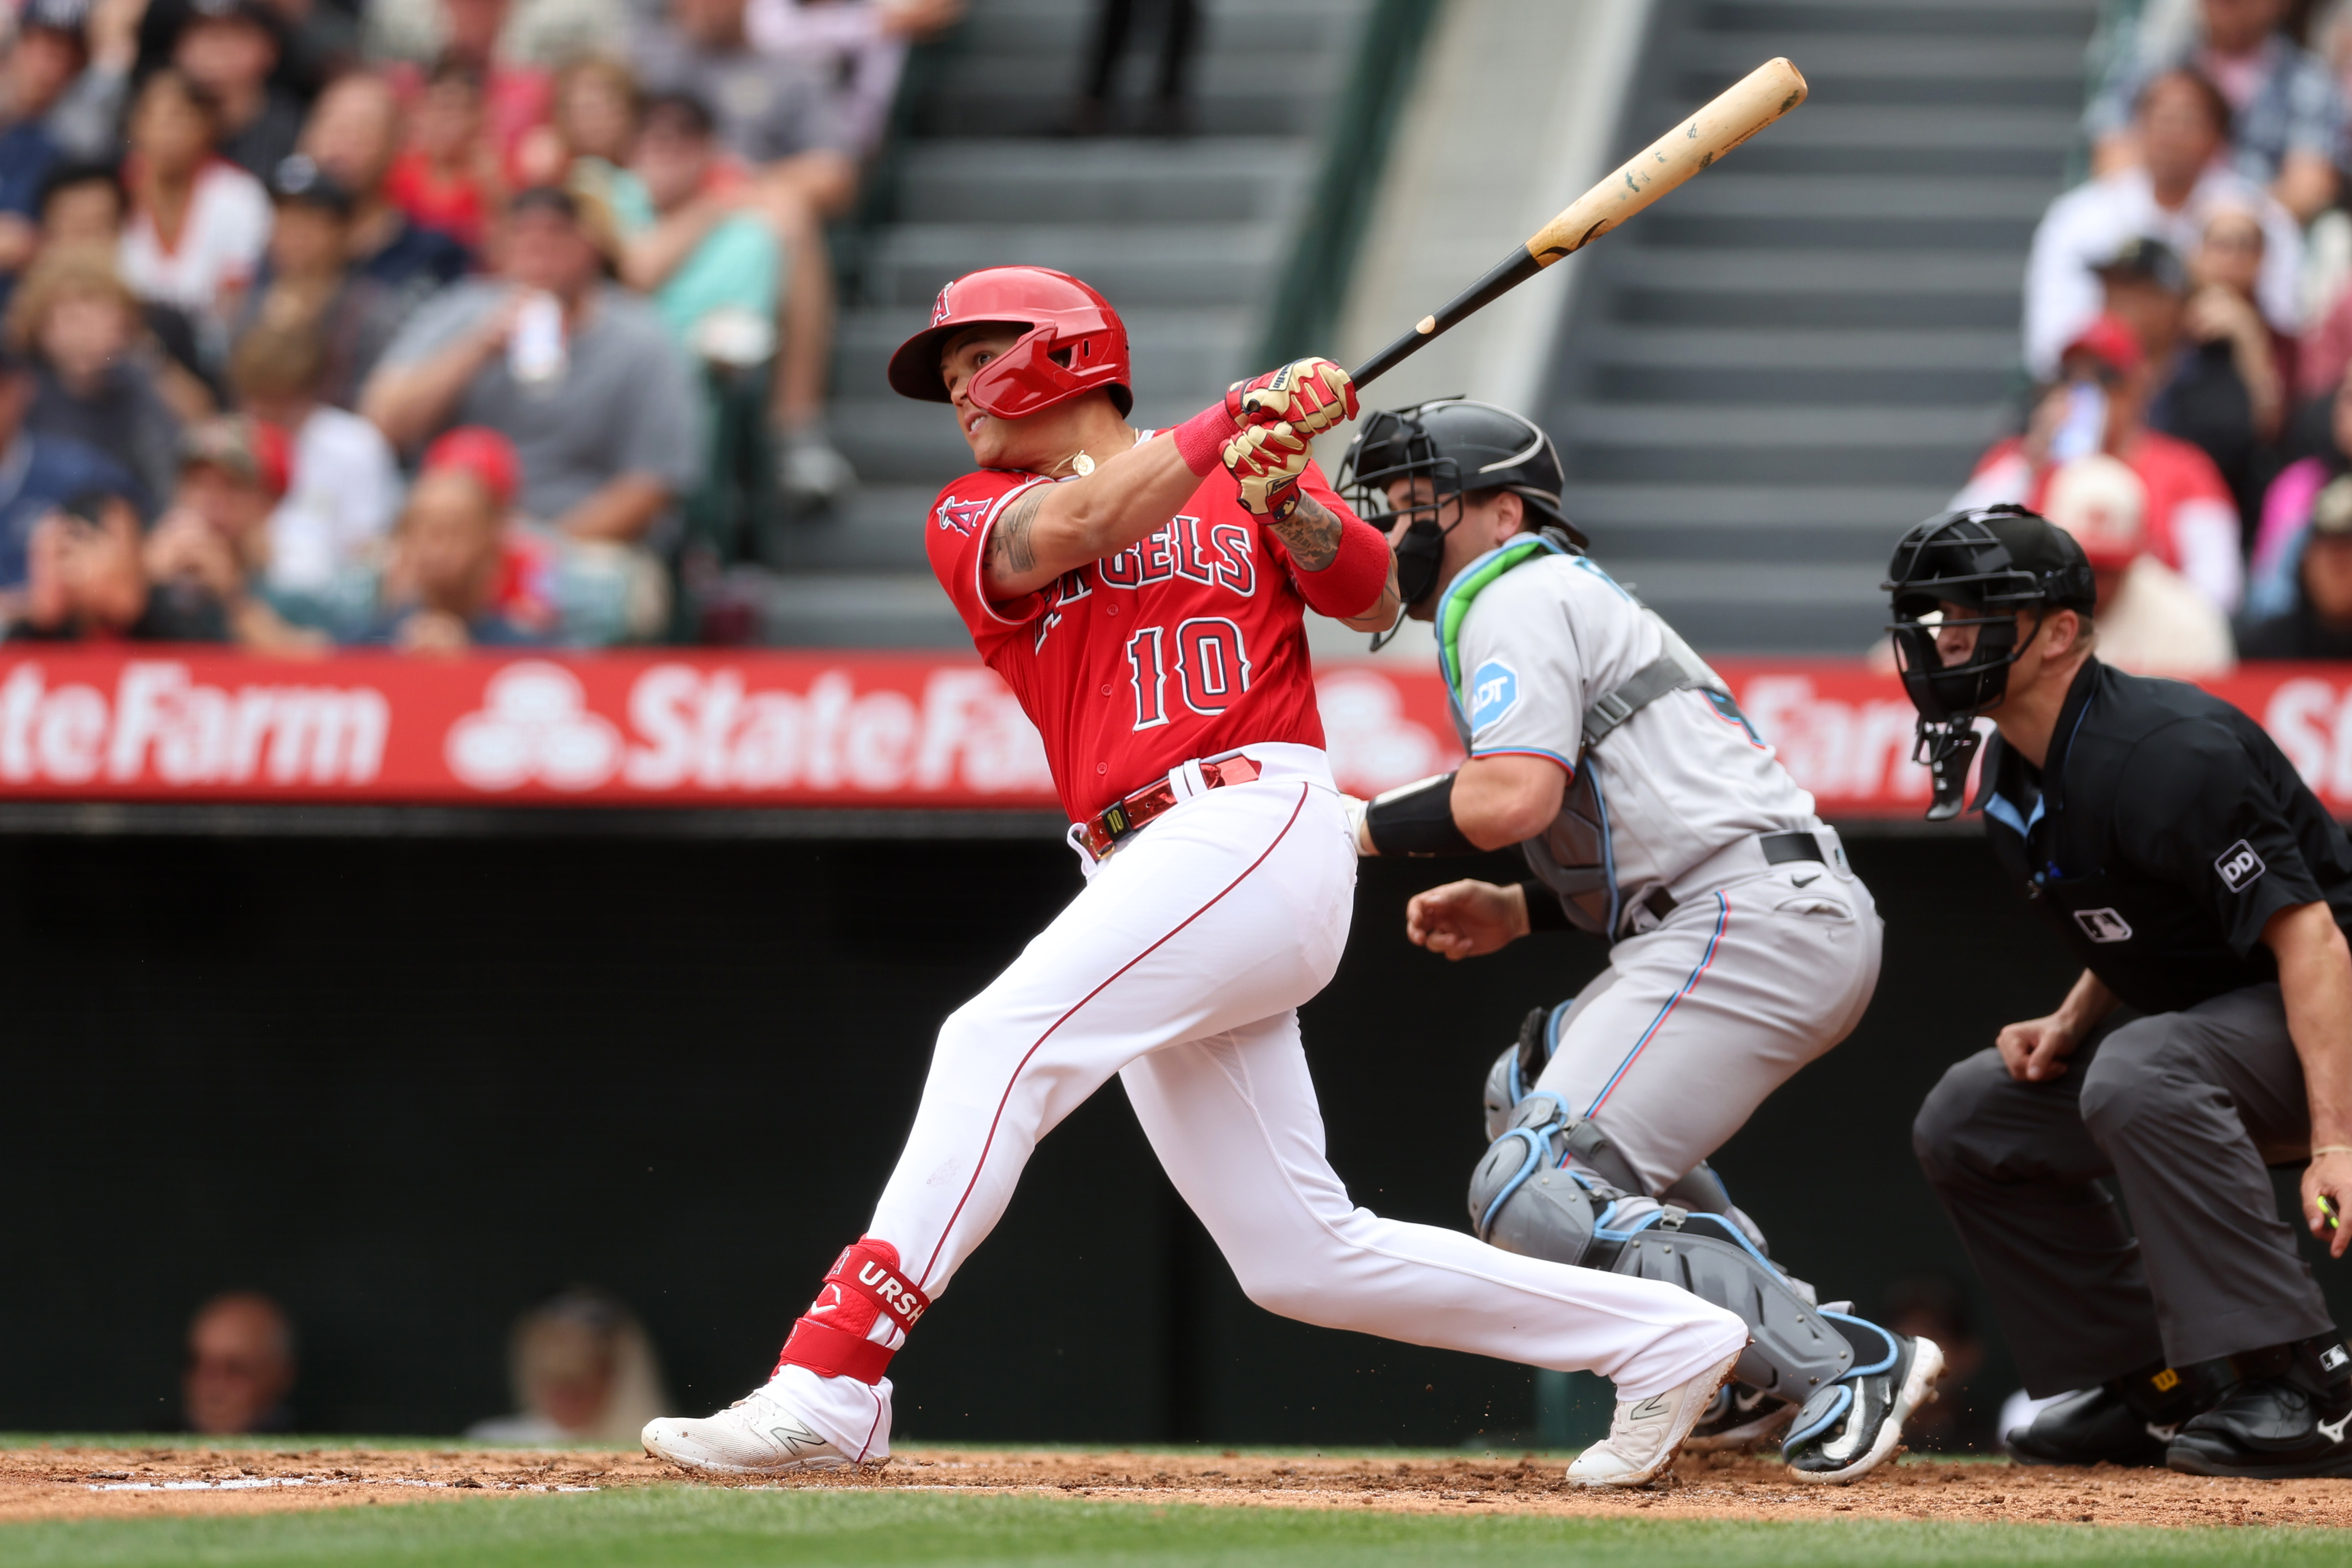 Gio Urshela of the Los Angeles Angels bats during the game against the Miami Marlins at Angel Stadium of Anaheim on May 28, 2023 in Anaheim, California.